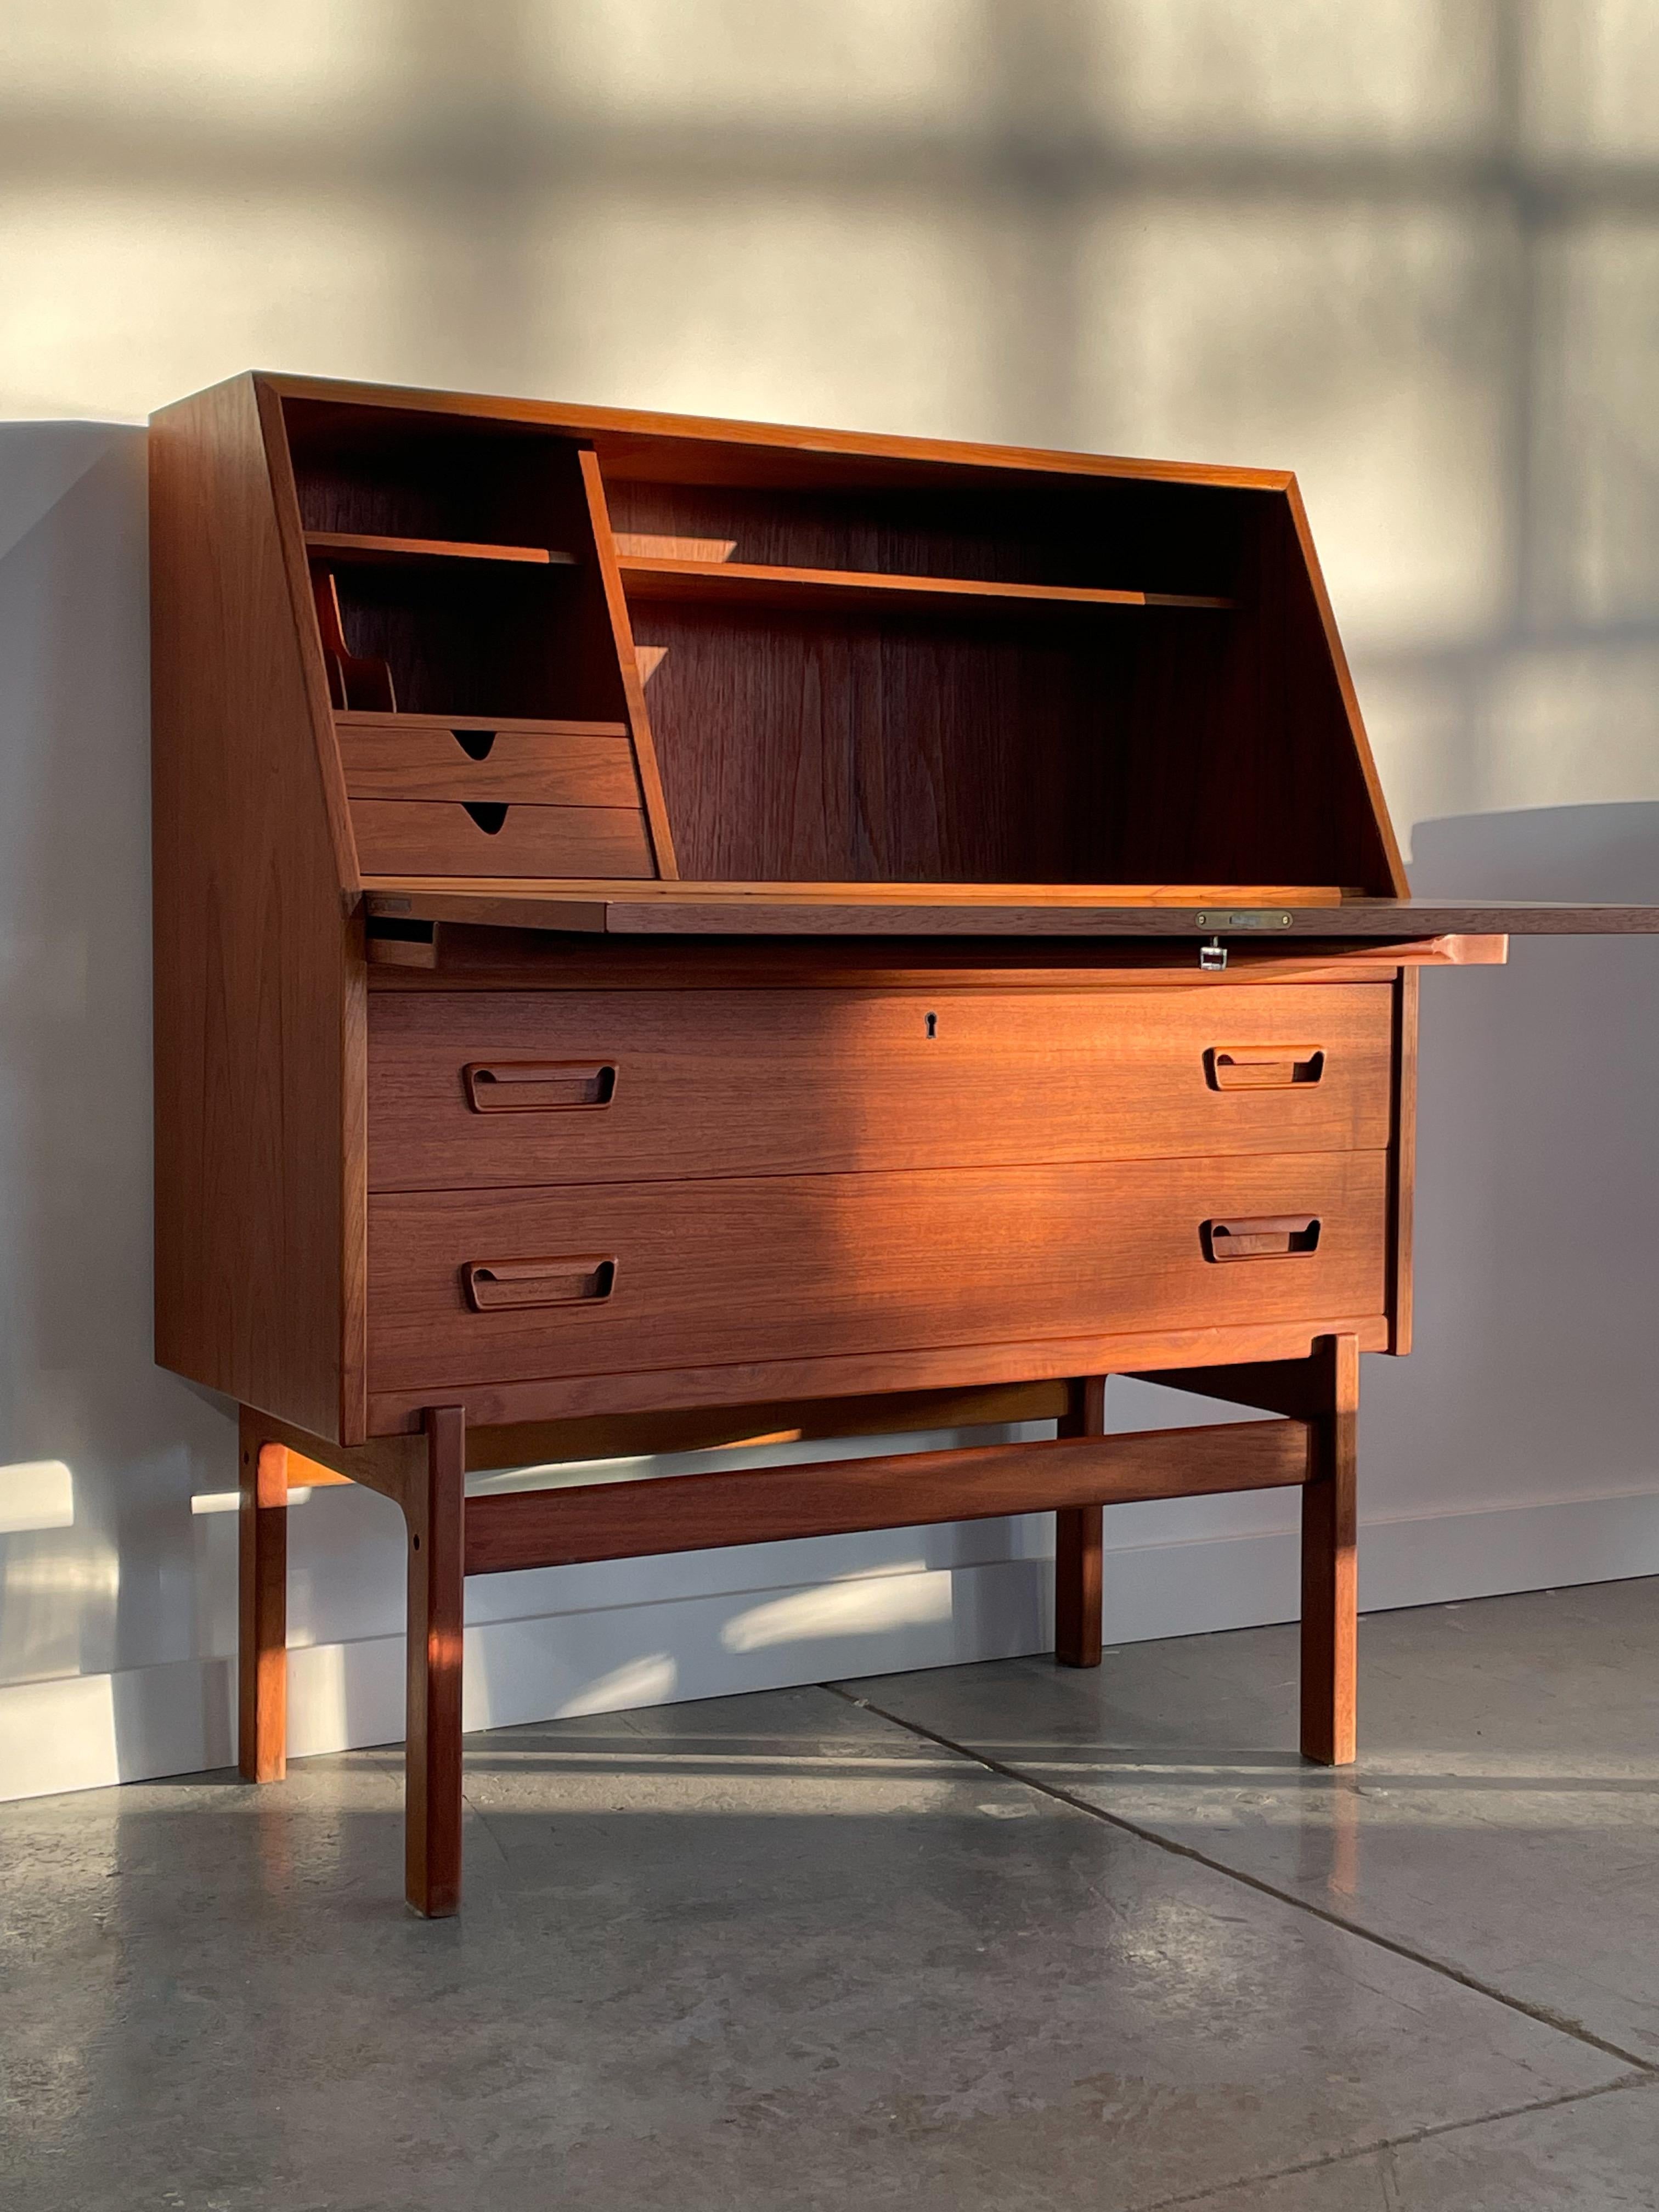 Stunning Model 68 teak drop-front secretary desk designed by Arne Wahl Iversen for Vinde Mobelfabrik, Denmark. This beautiful piece features solid construction, a drop-down writing surface, and exquisite detailing throughout including solid teak